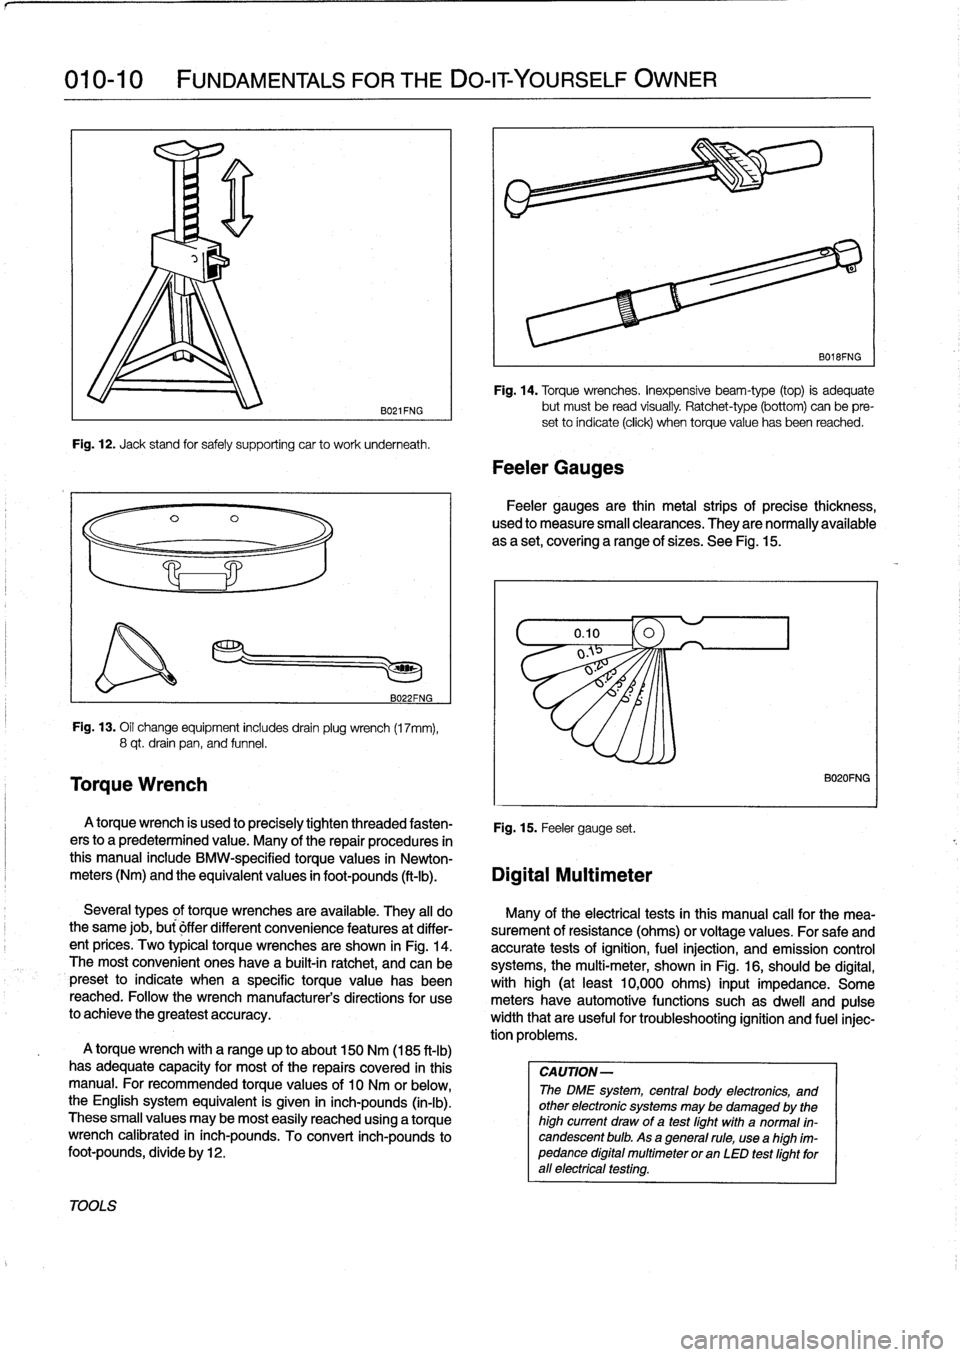 BMW 328i 1993 E36 Workshop Manual 
010-10

	

FUNDAMENTALS
FOR
THE
DO-IT
YOURSELF
OWNER

TOOLS

Torque
Wrench

B021FNG

Fig
.
12
.
Jack
stand
for
safely
supporting
car
to
work
underneath
.

B022FNG

Fig
.
13
.
Oil
change
equipment
inc